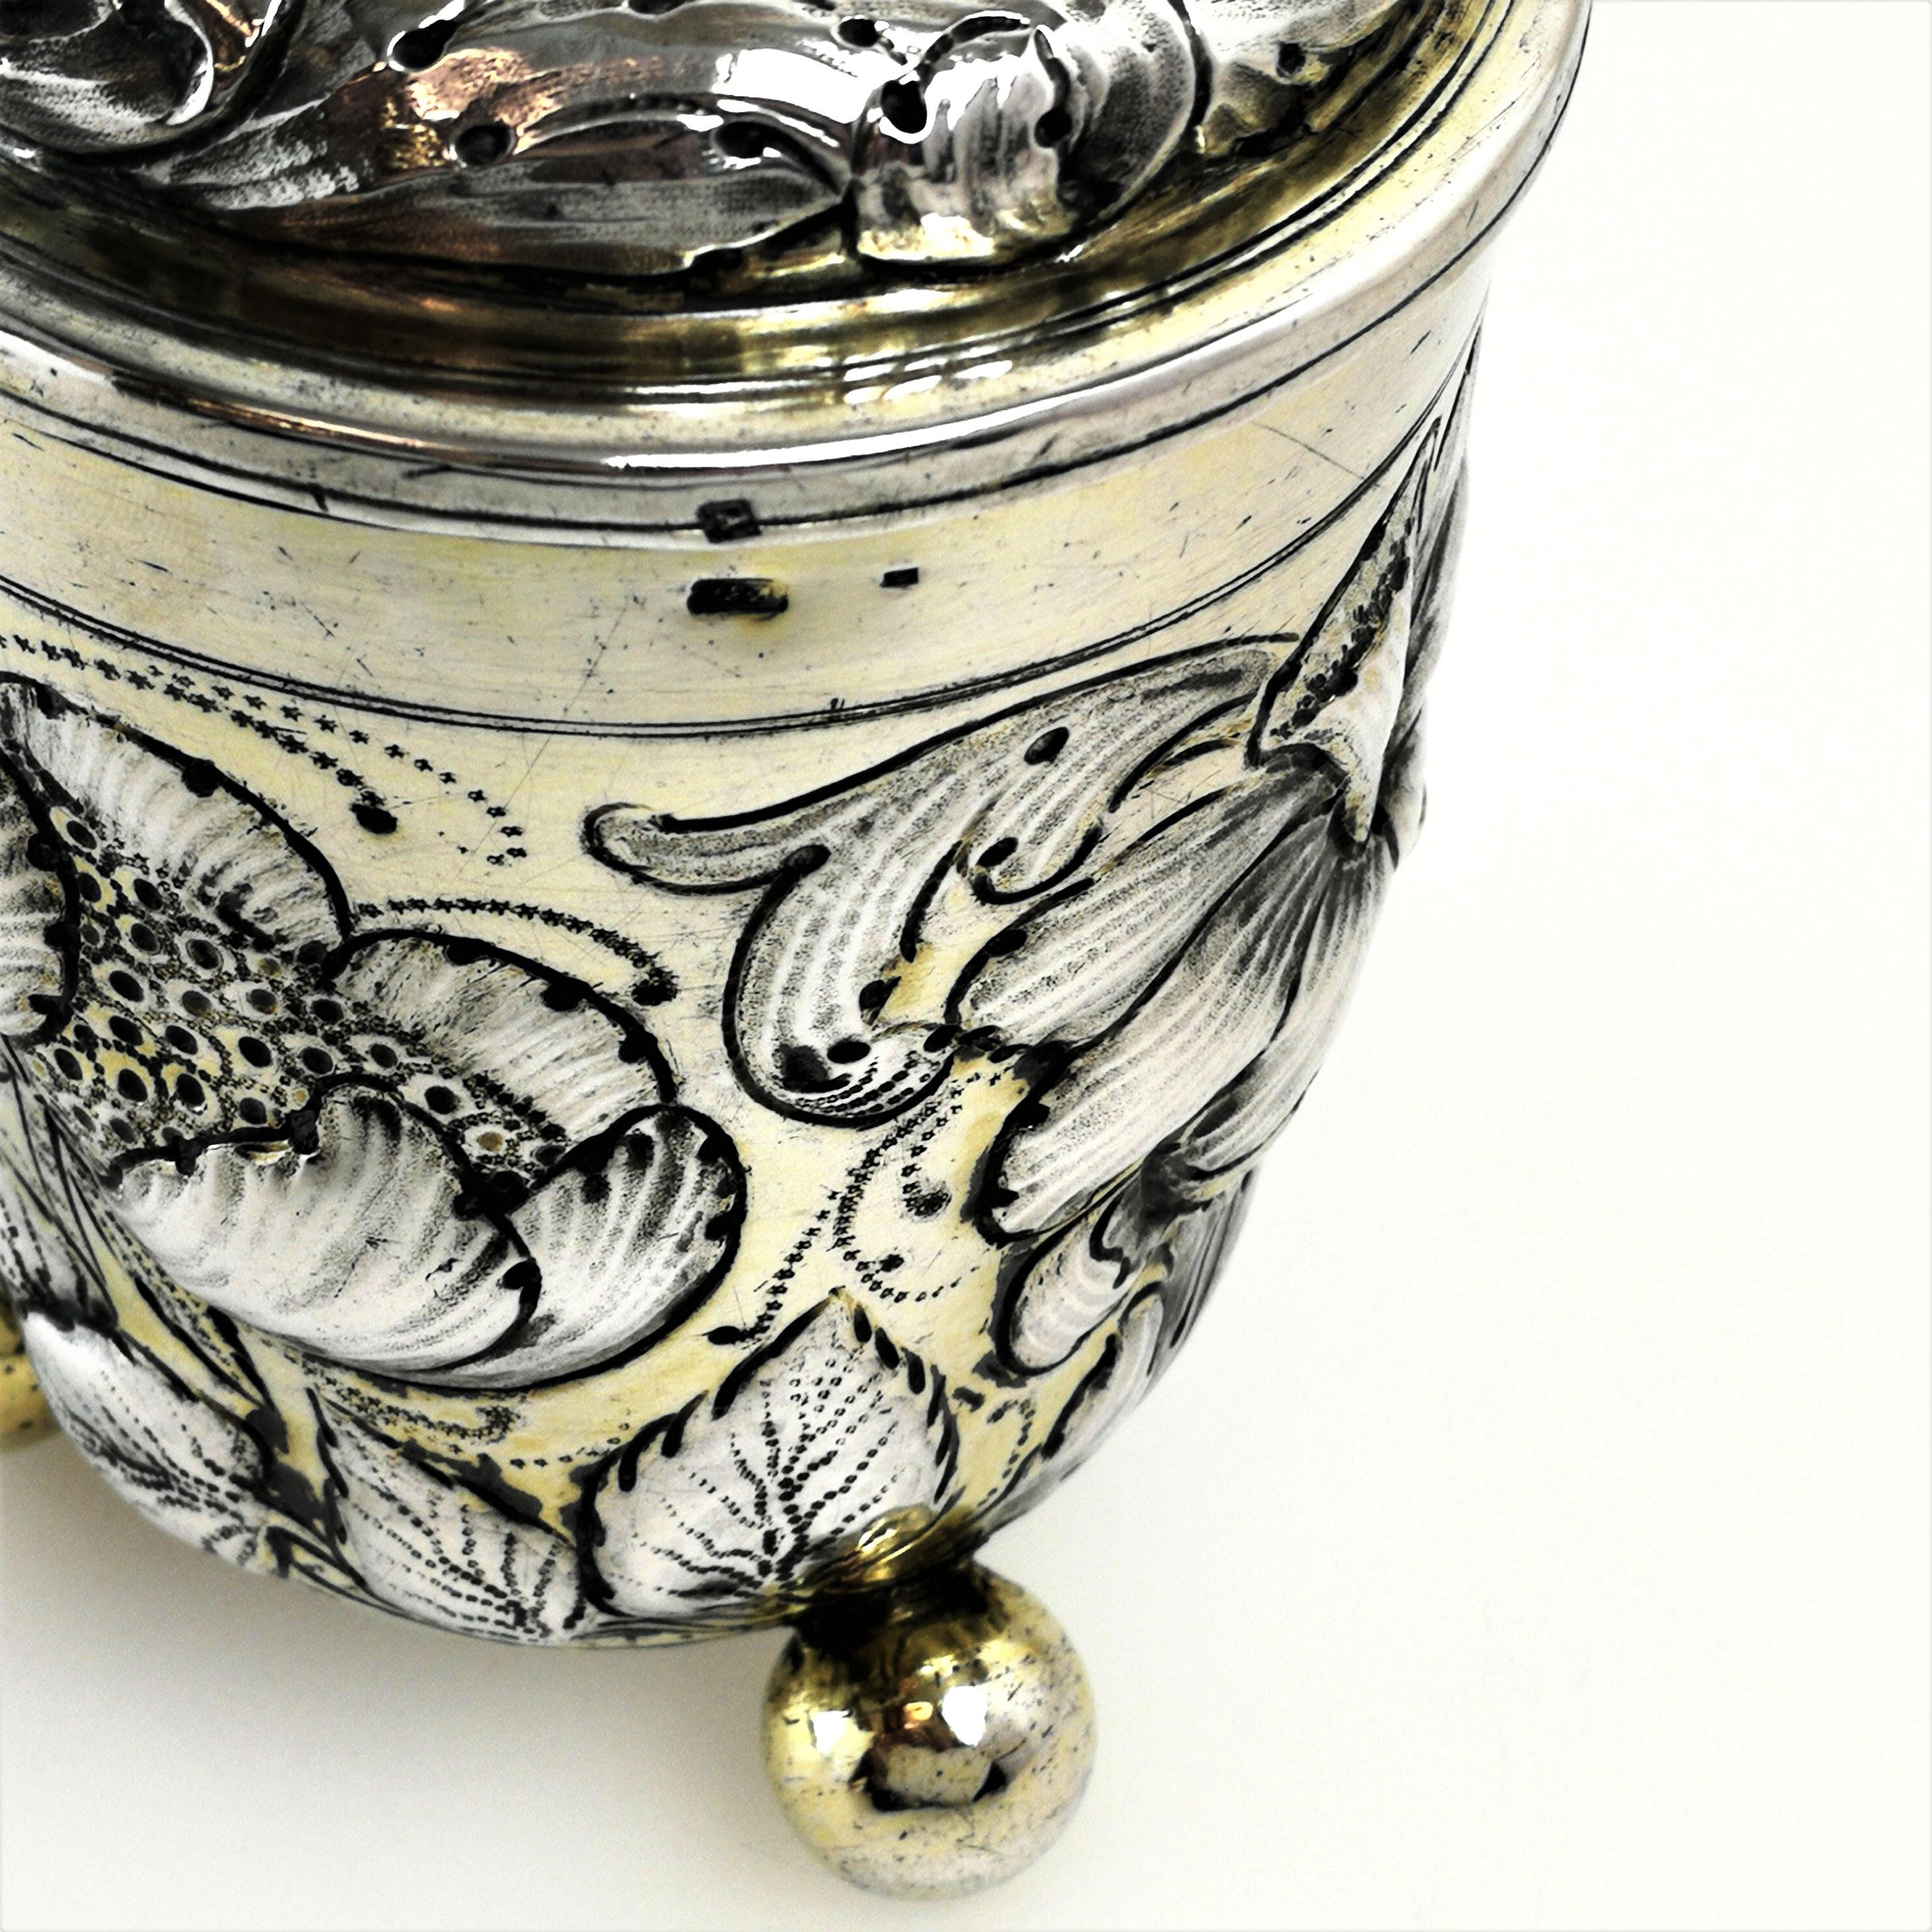 Antique Early German Silver Cup and Cover / Lidded Beaker circa 1680 Augsburg 4